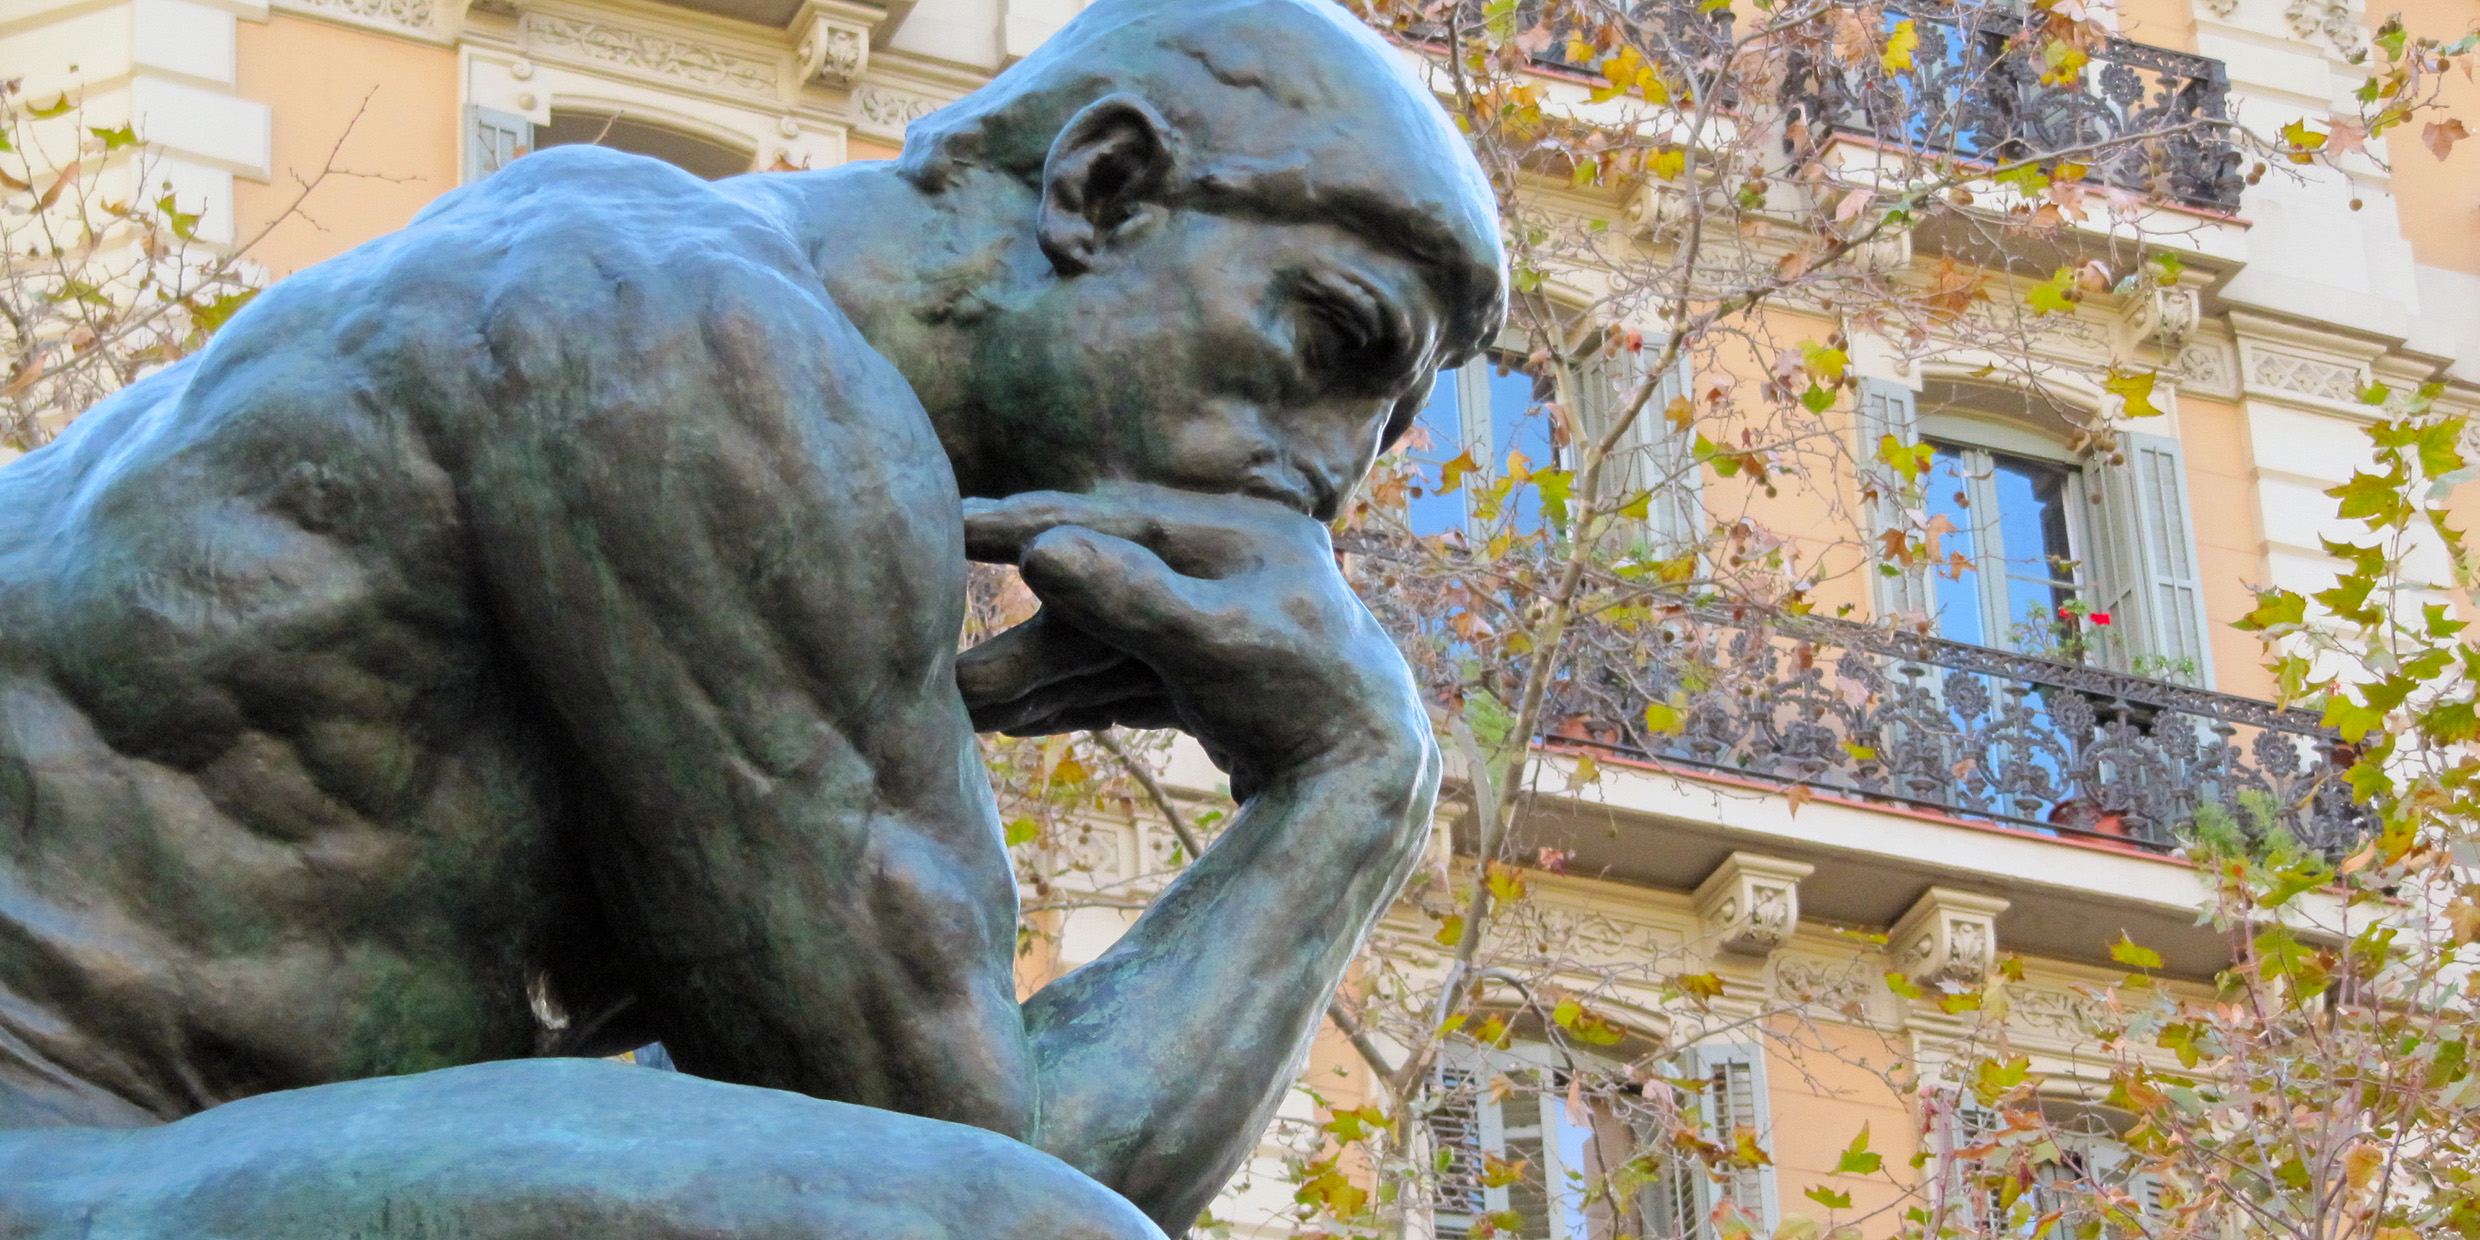 Image of The Thinker